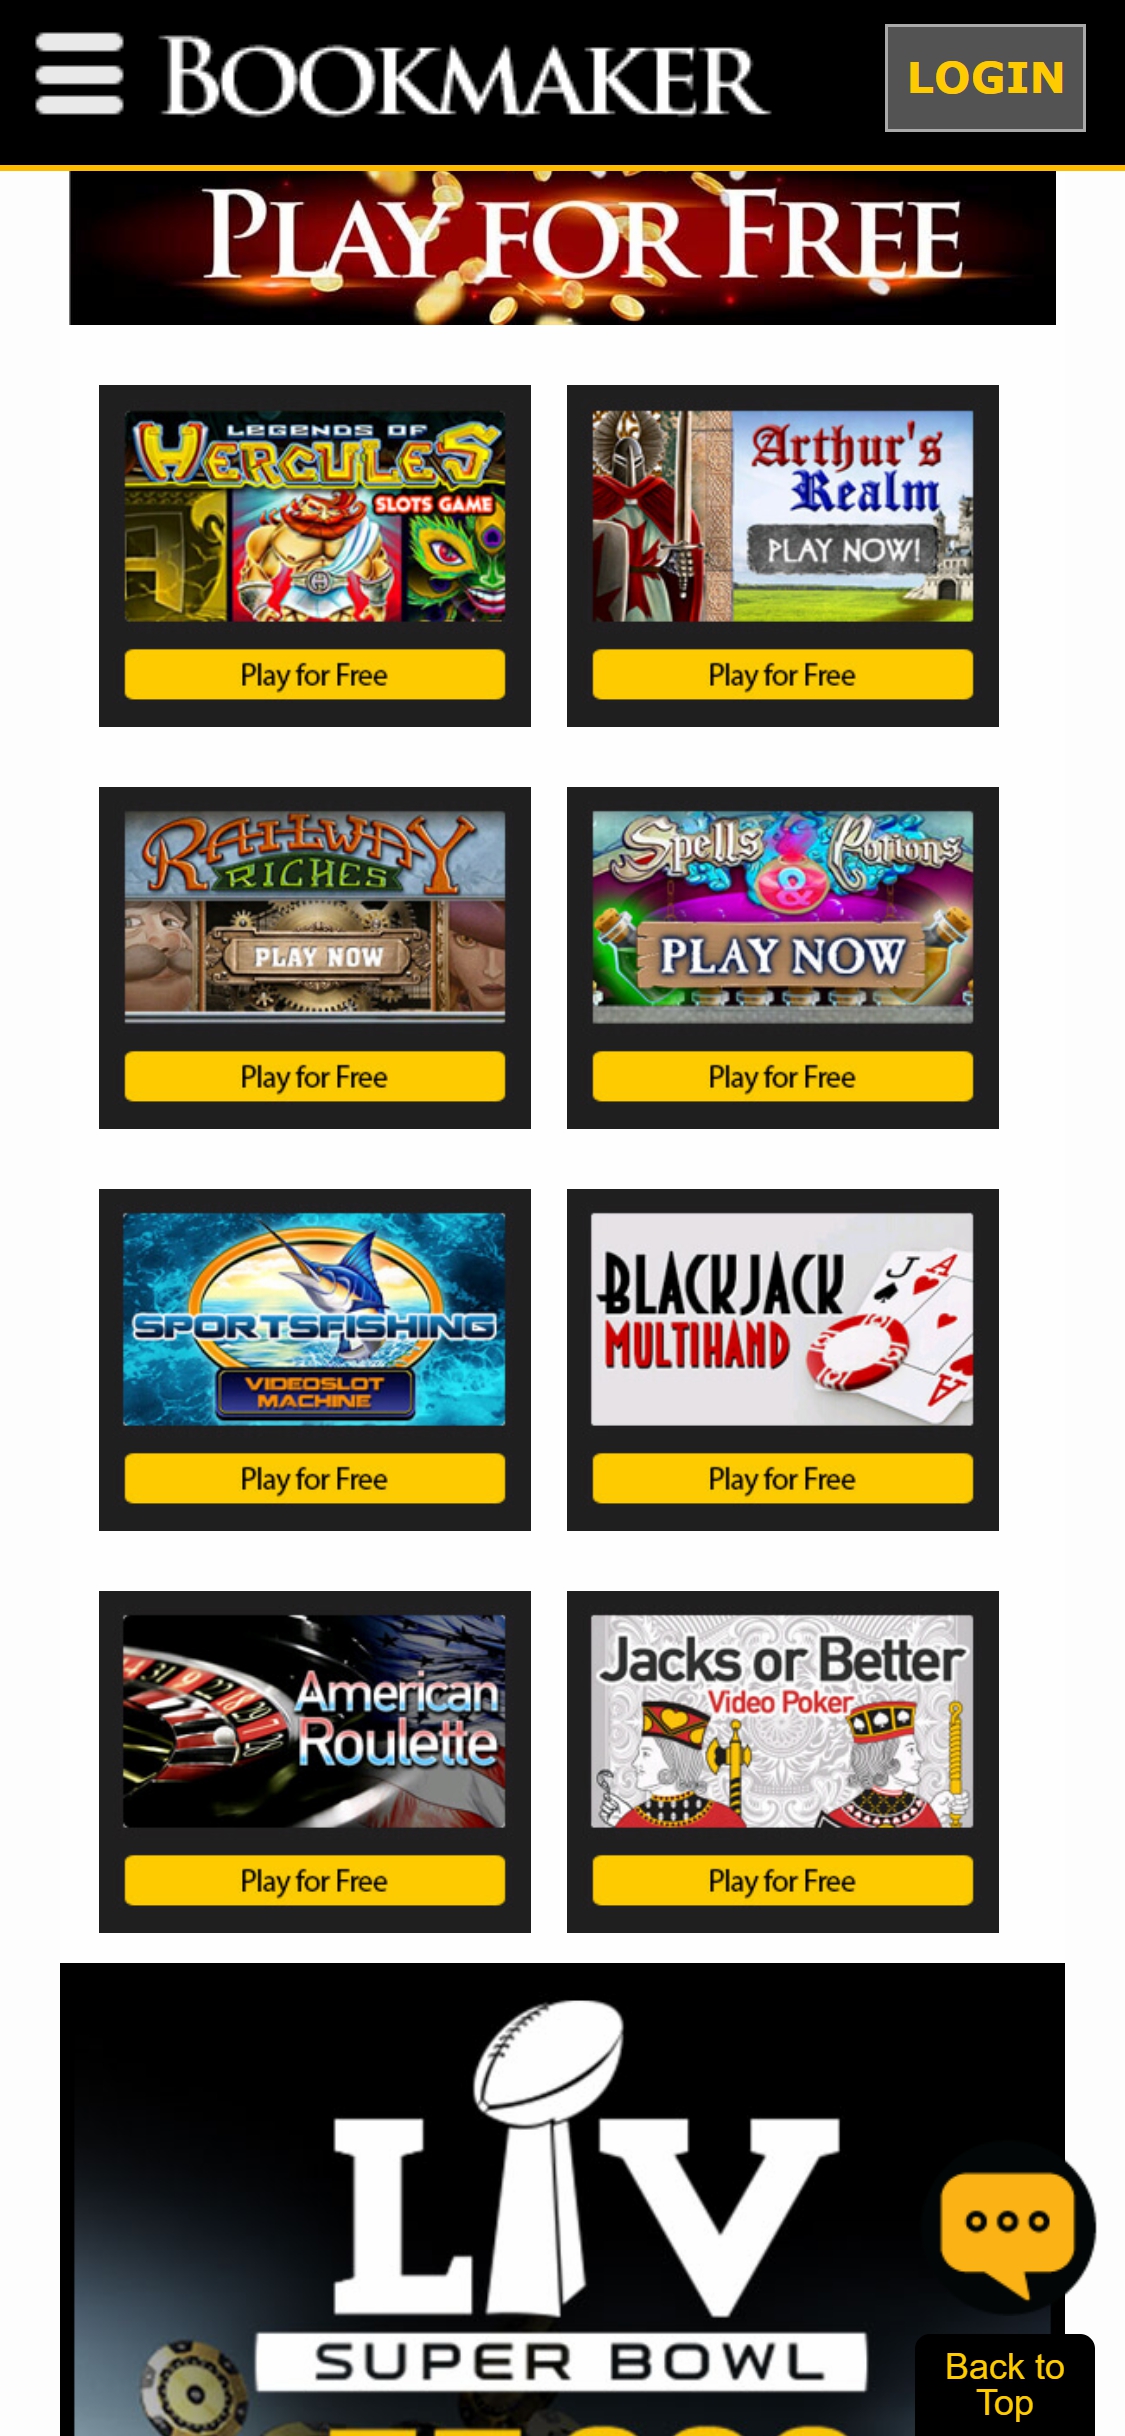 BookMaker Casino Mobile Games Review